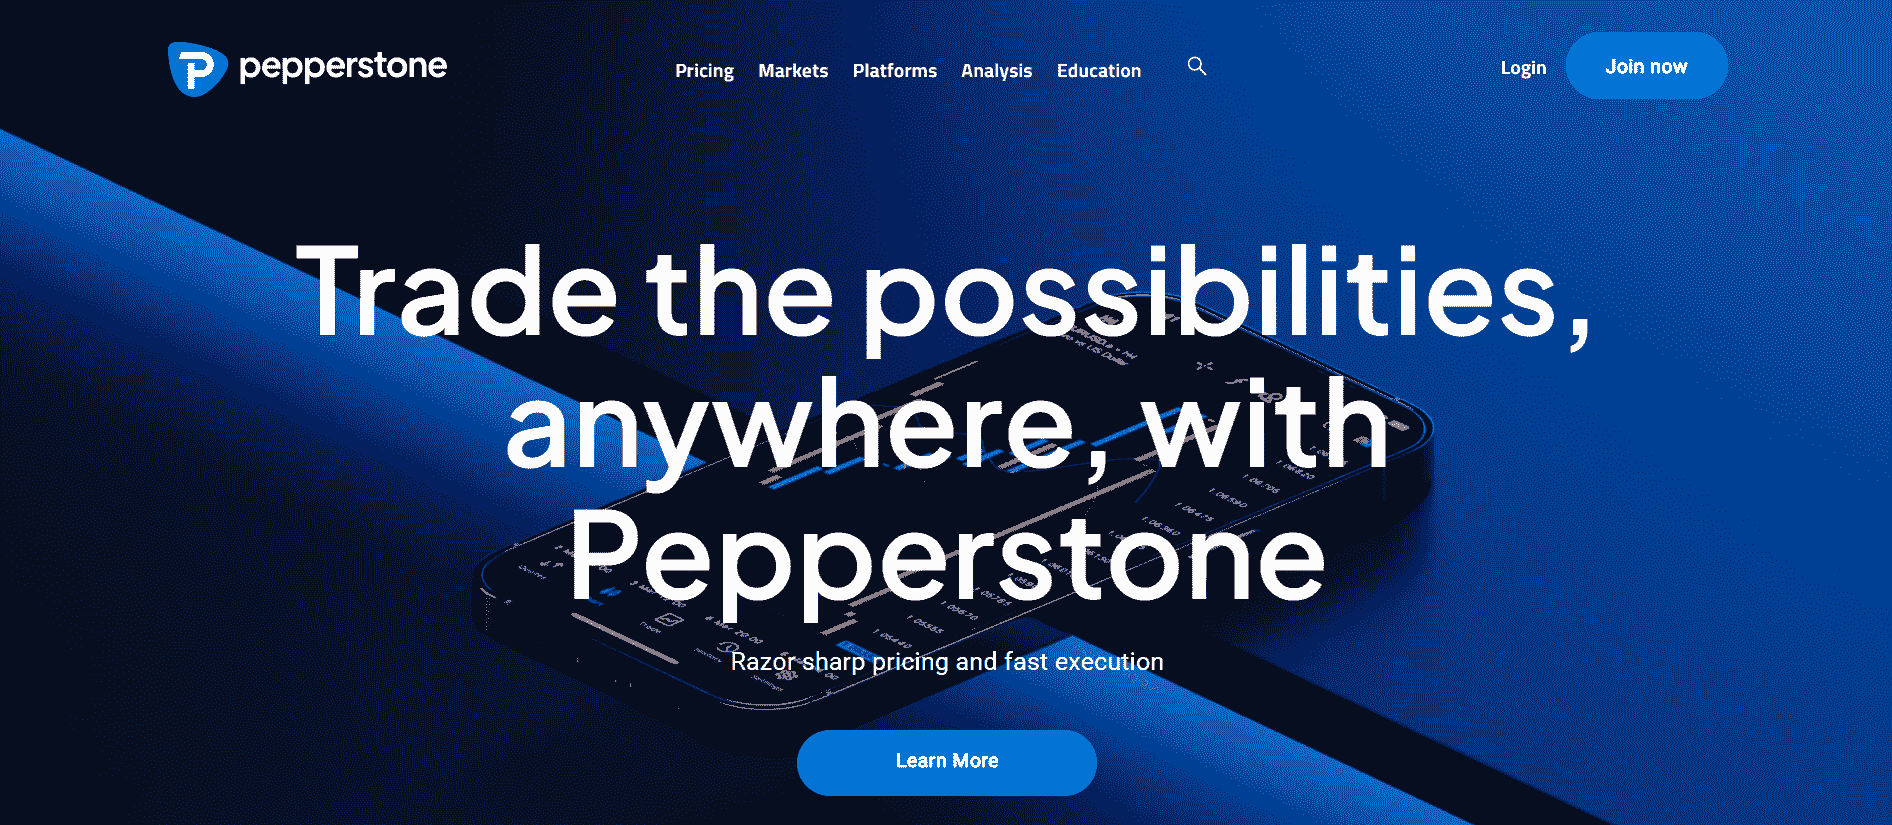 Pepperstone Homepage.png